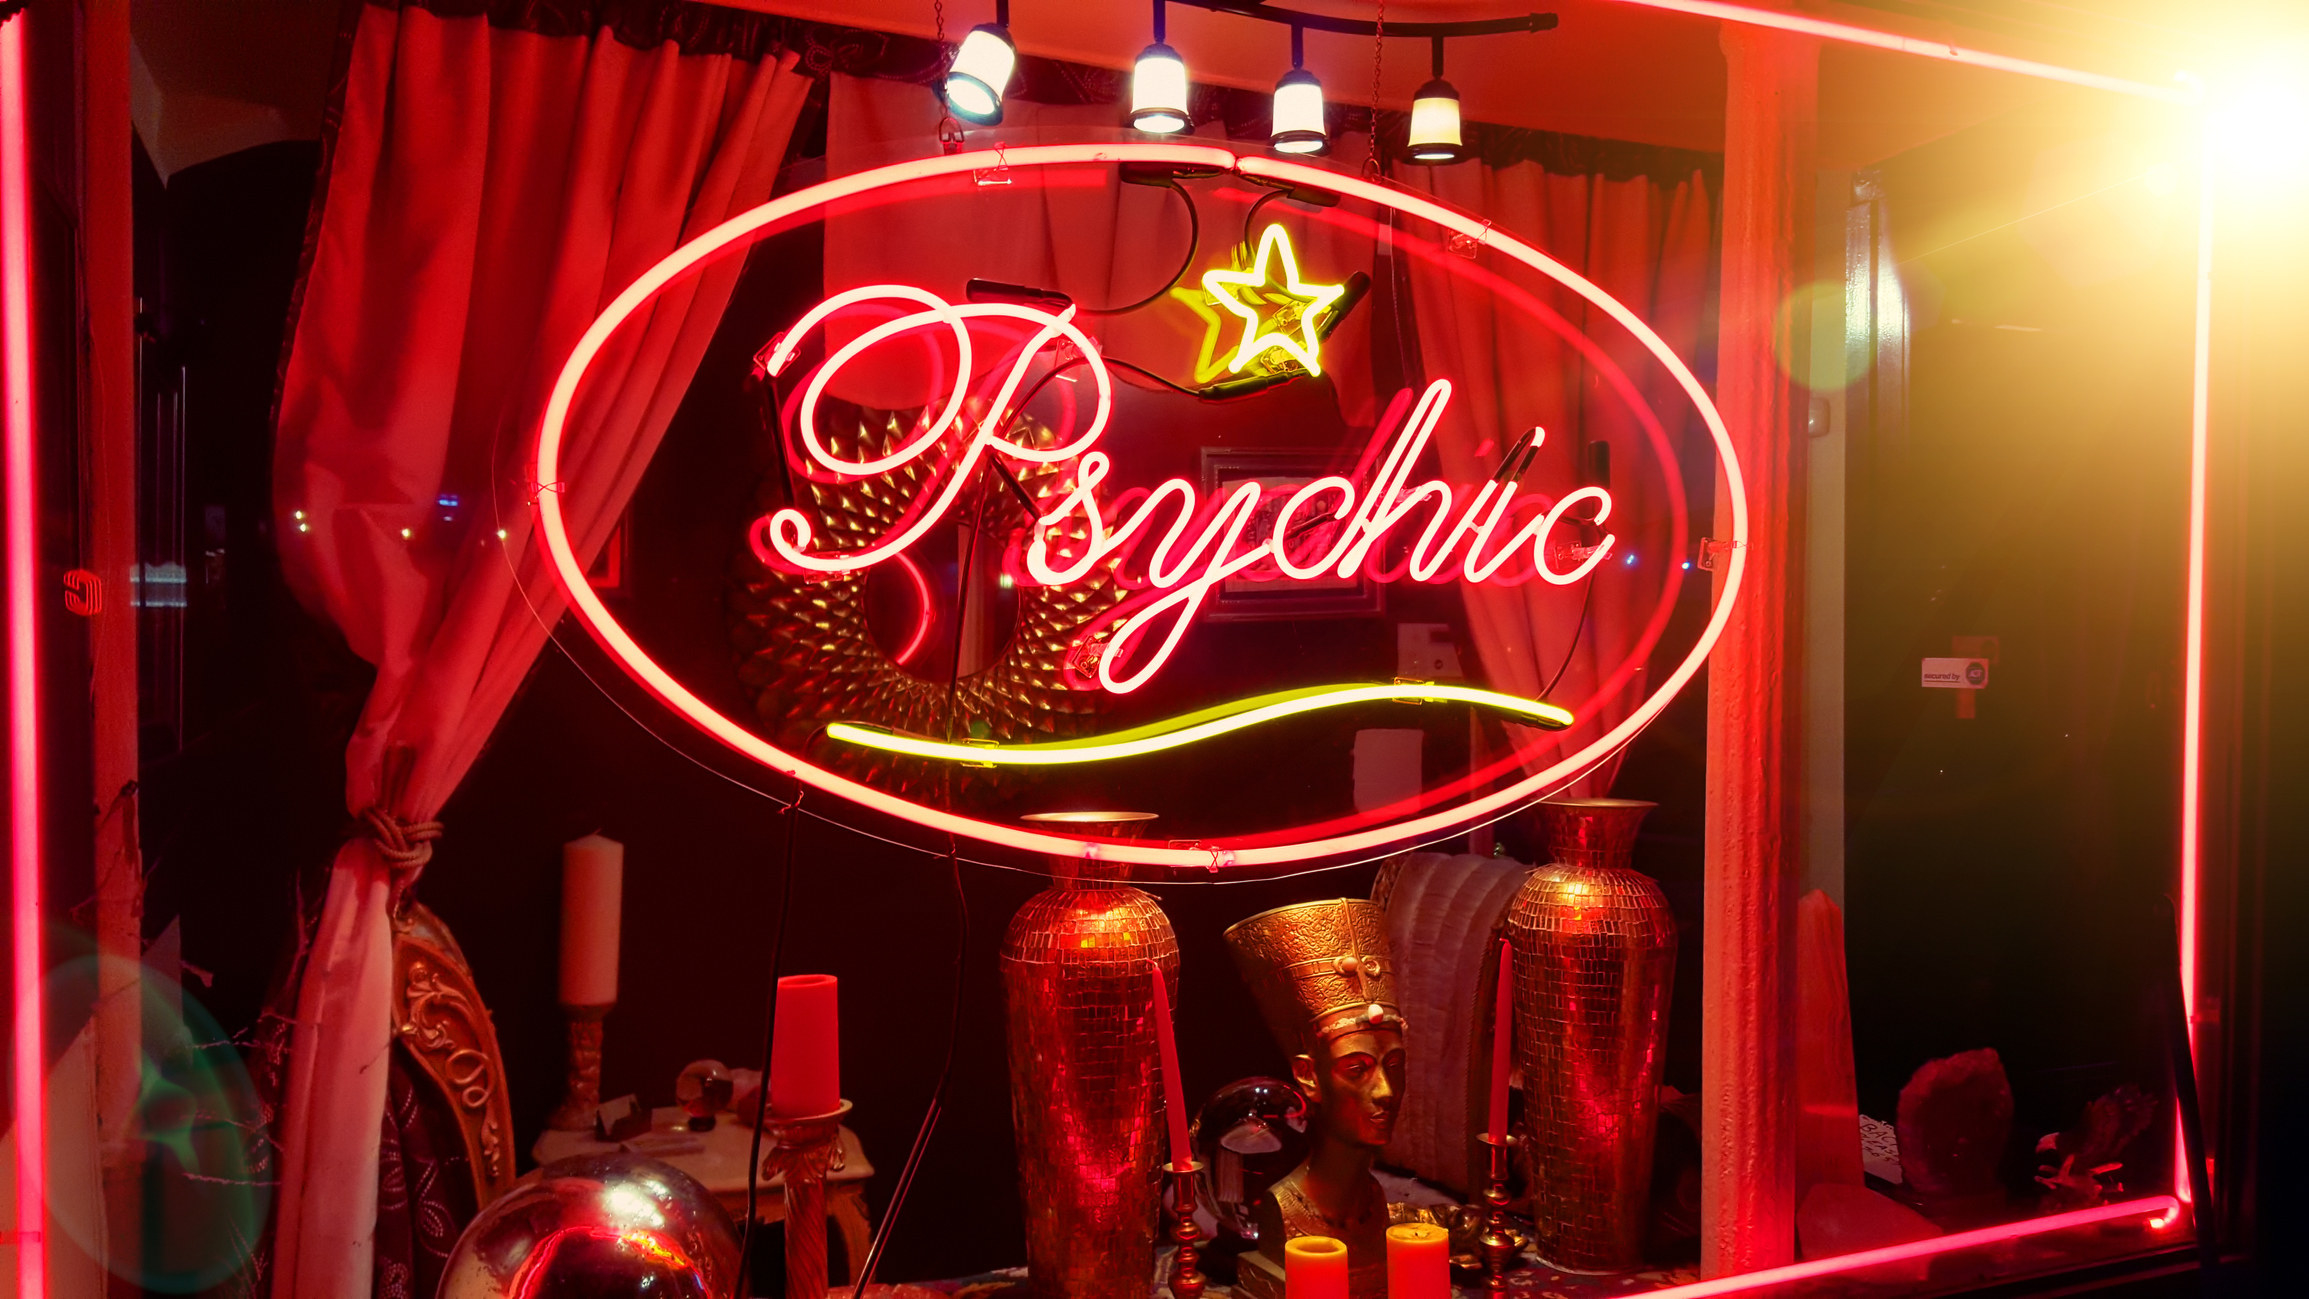 A lit-up sign of a psychic